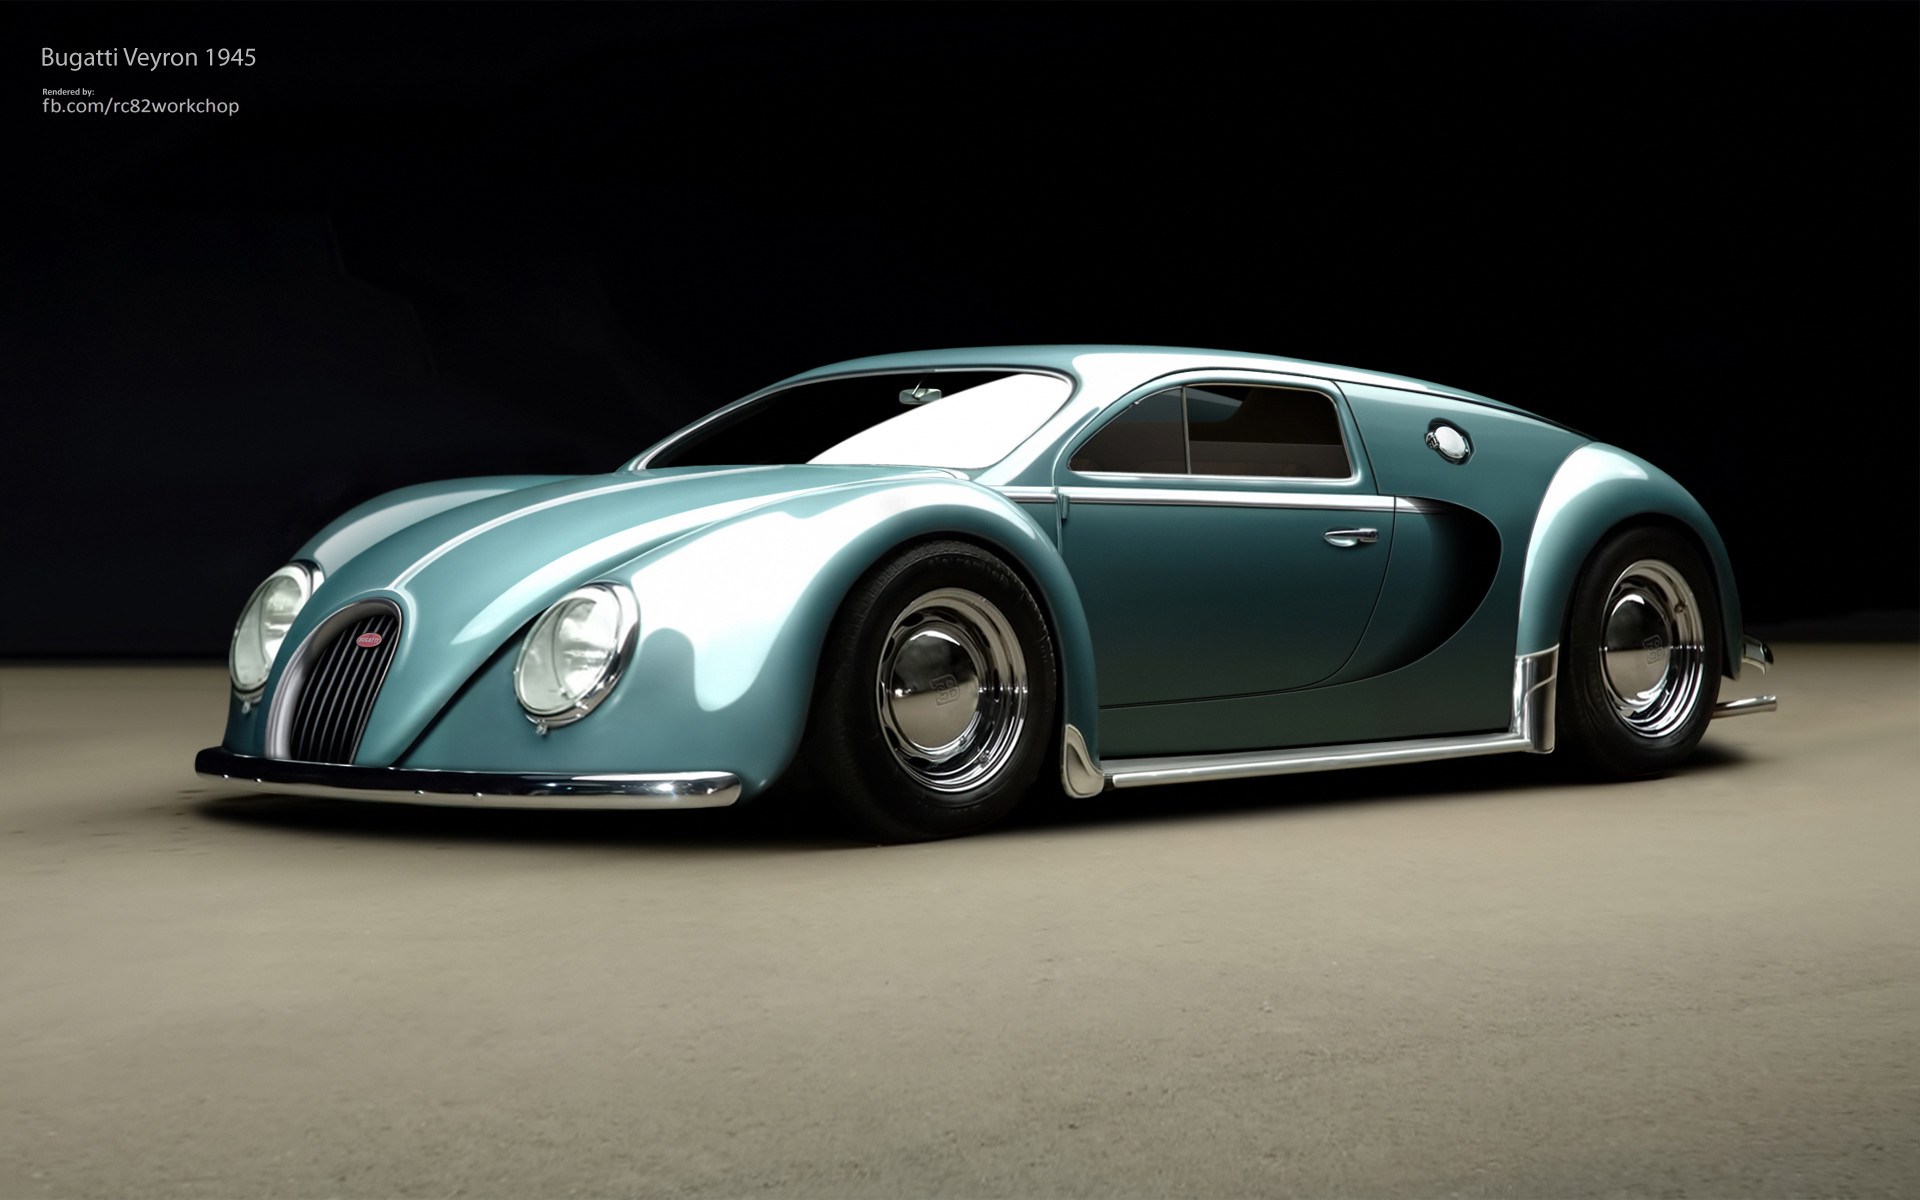 If the Bugatti Veyron was designed in 1945...